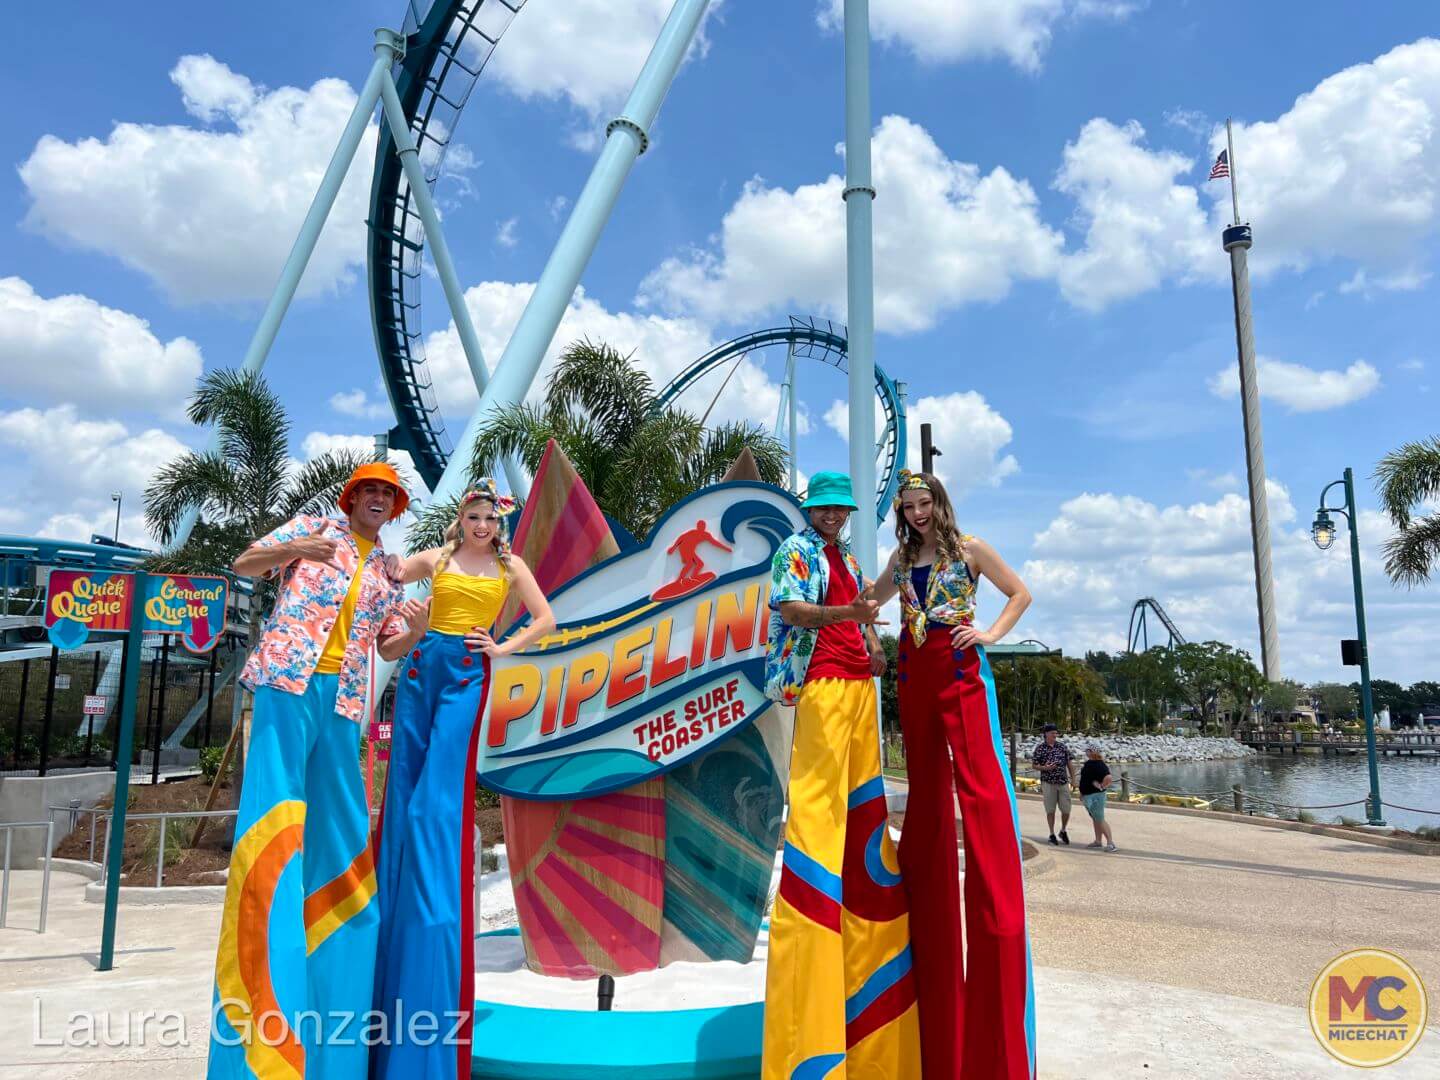 SeaWorld Orlando shares first look at new surfing coaster